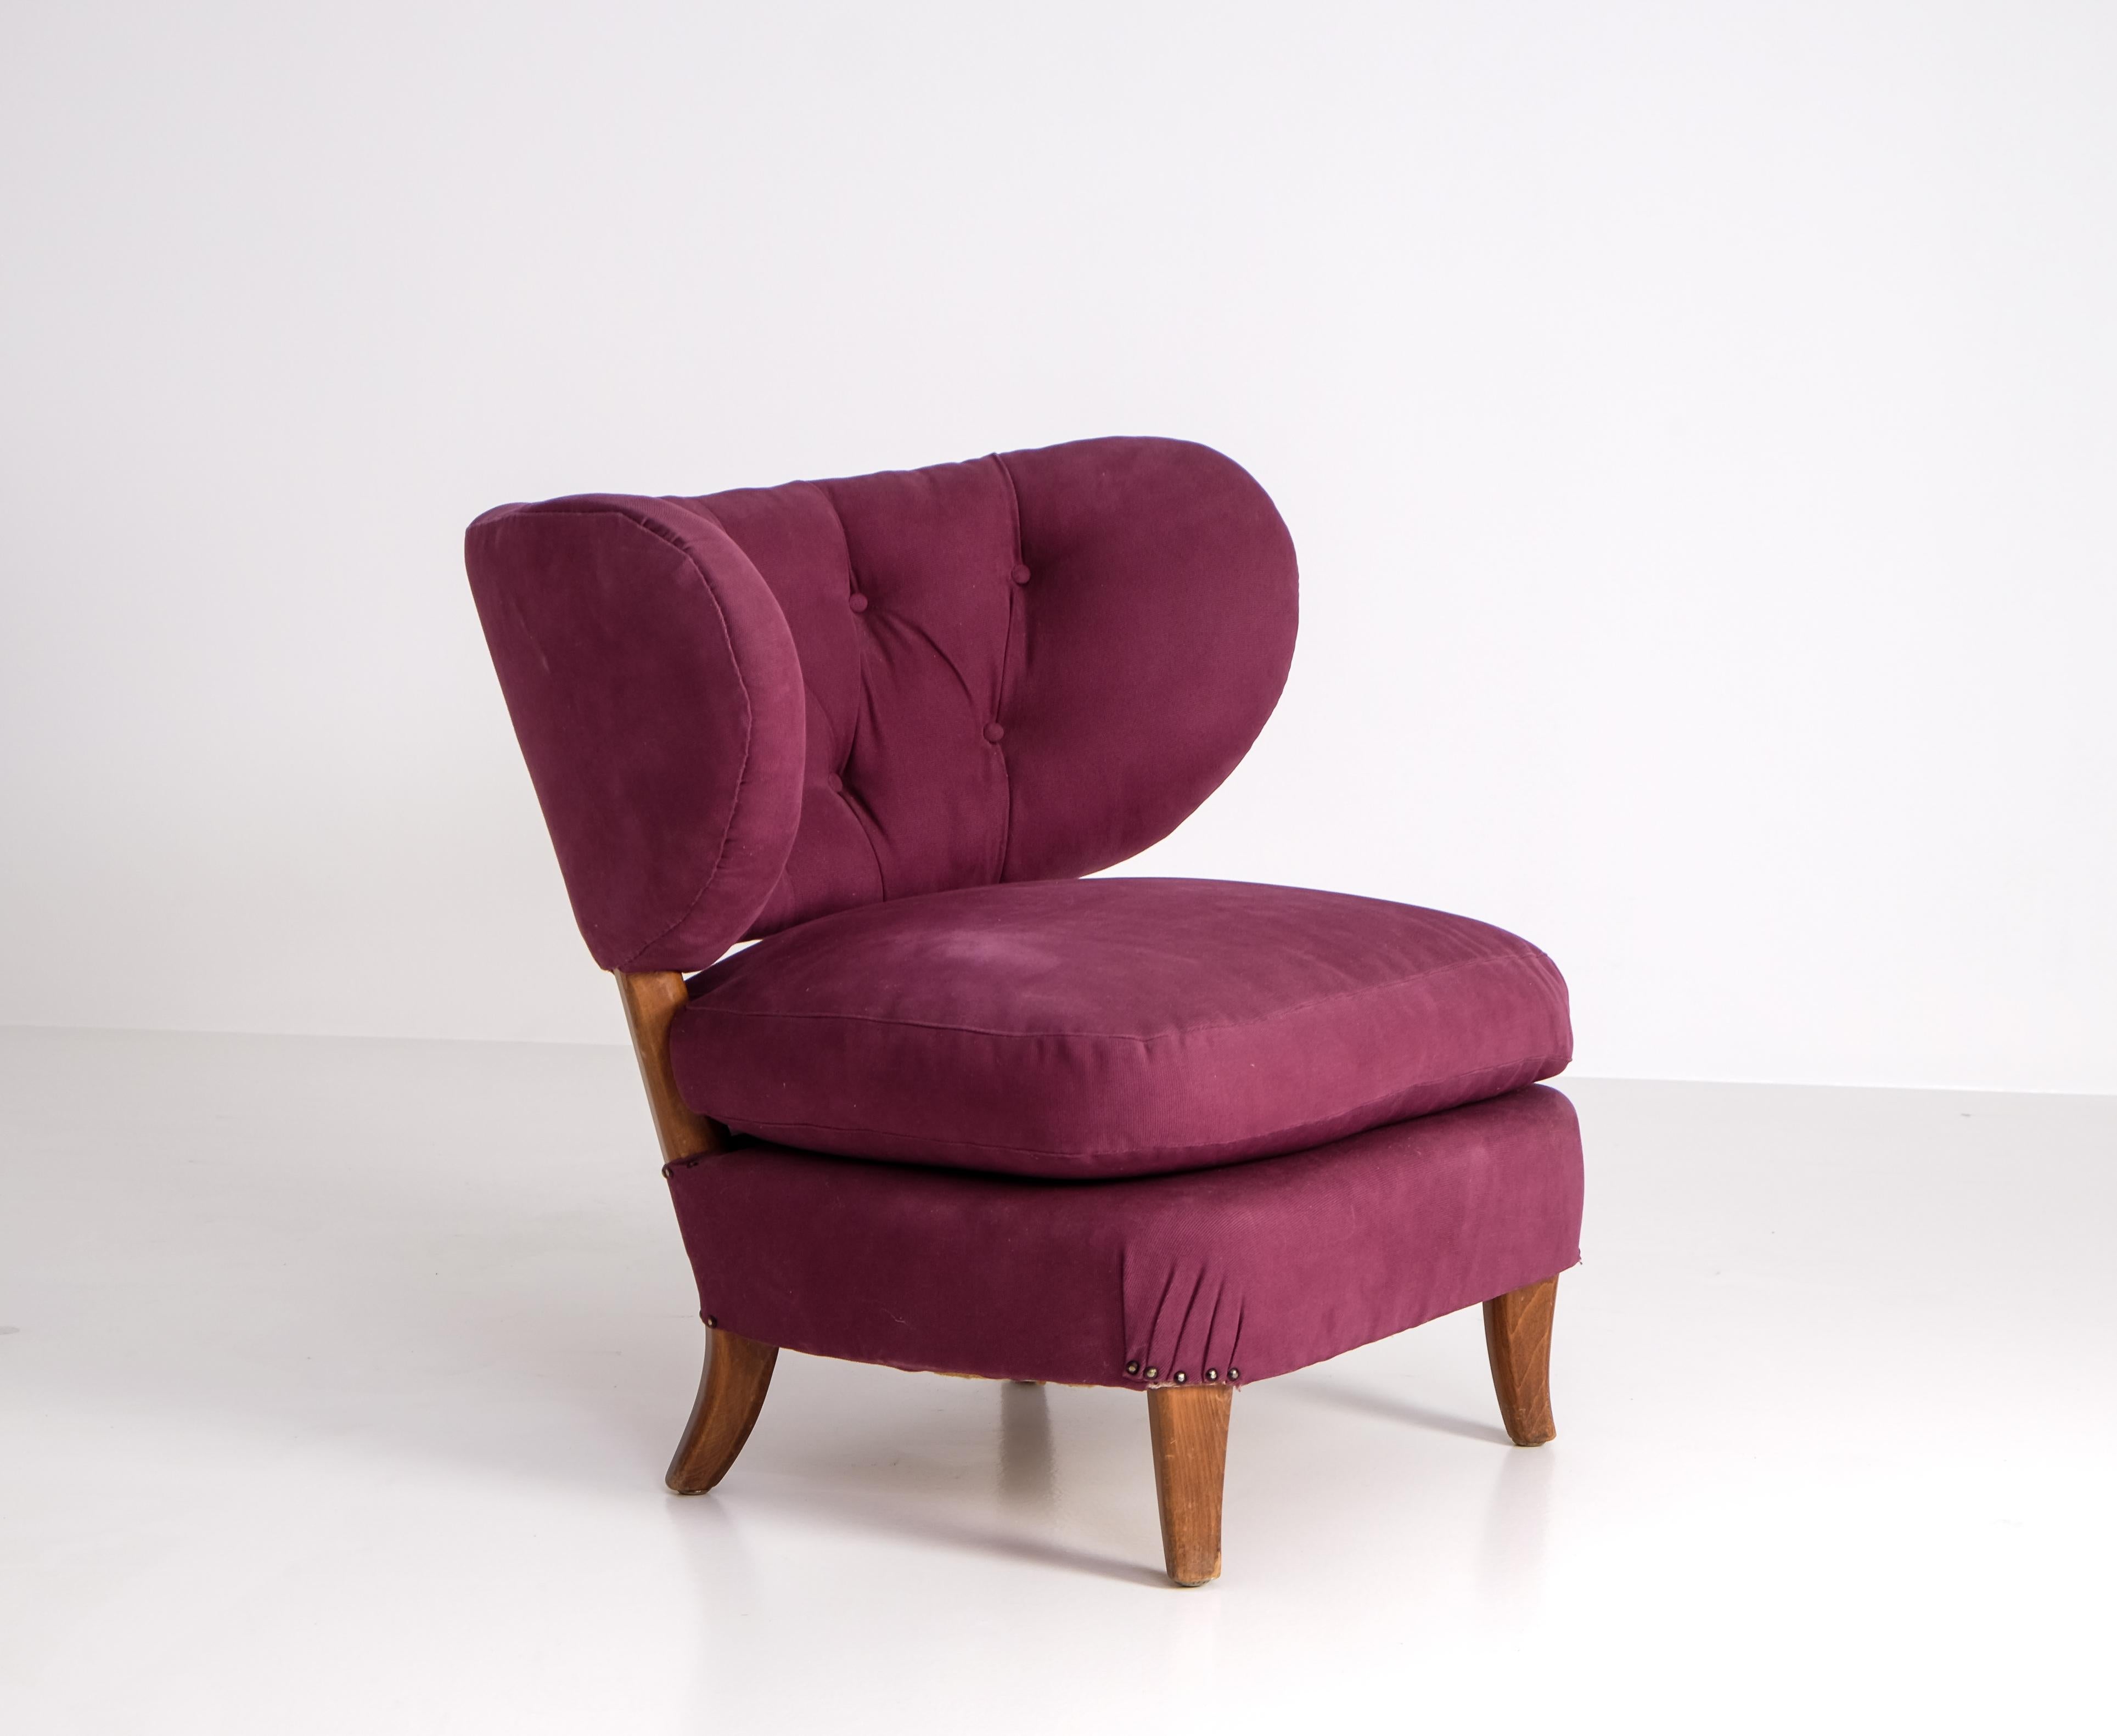 Velvet easy chair designed by Otto Schulz, produced by Boet, Sweden, 1940s.
 